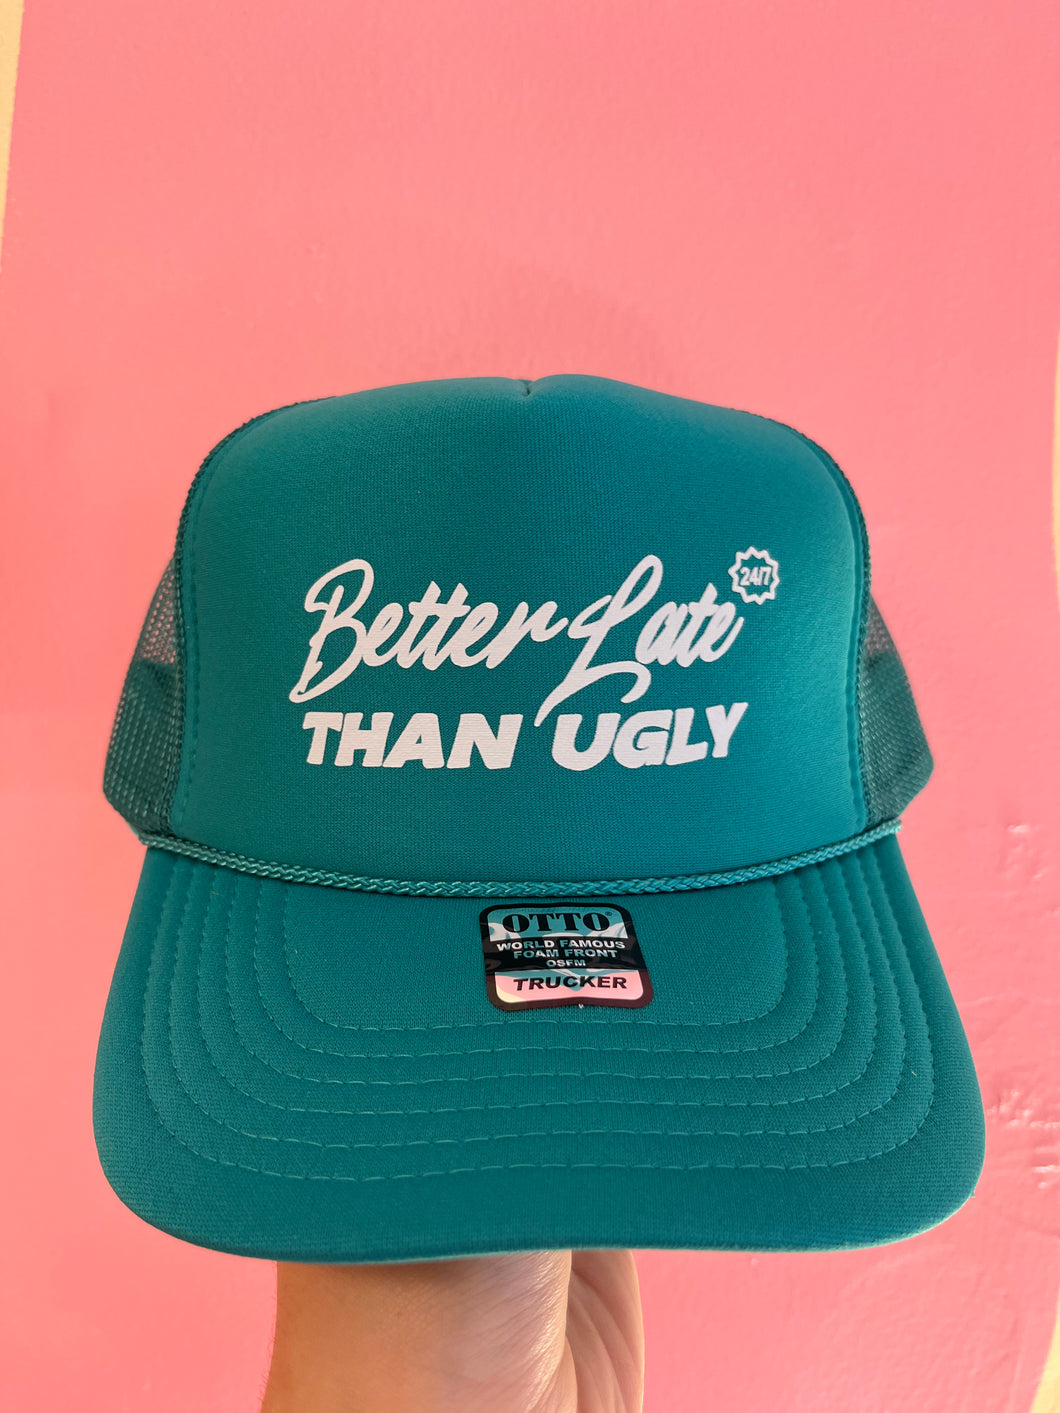 Better late than ugly trucker hat